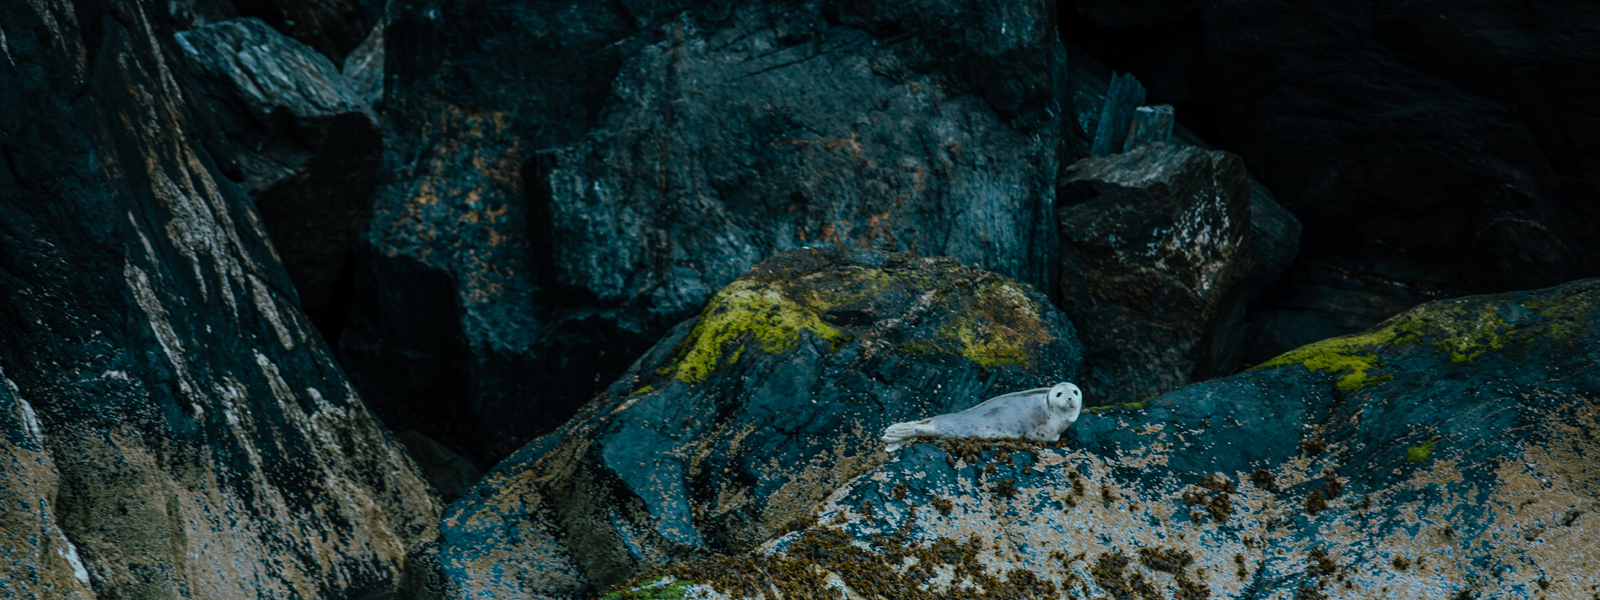 A grey seal basking on a rock around the south coast of the Isle of Man